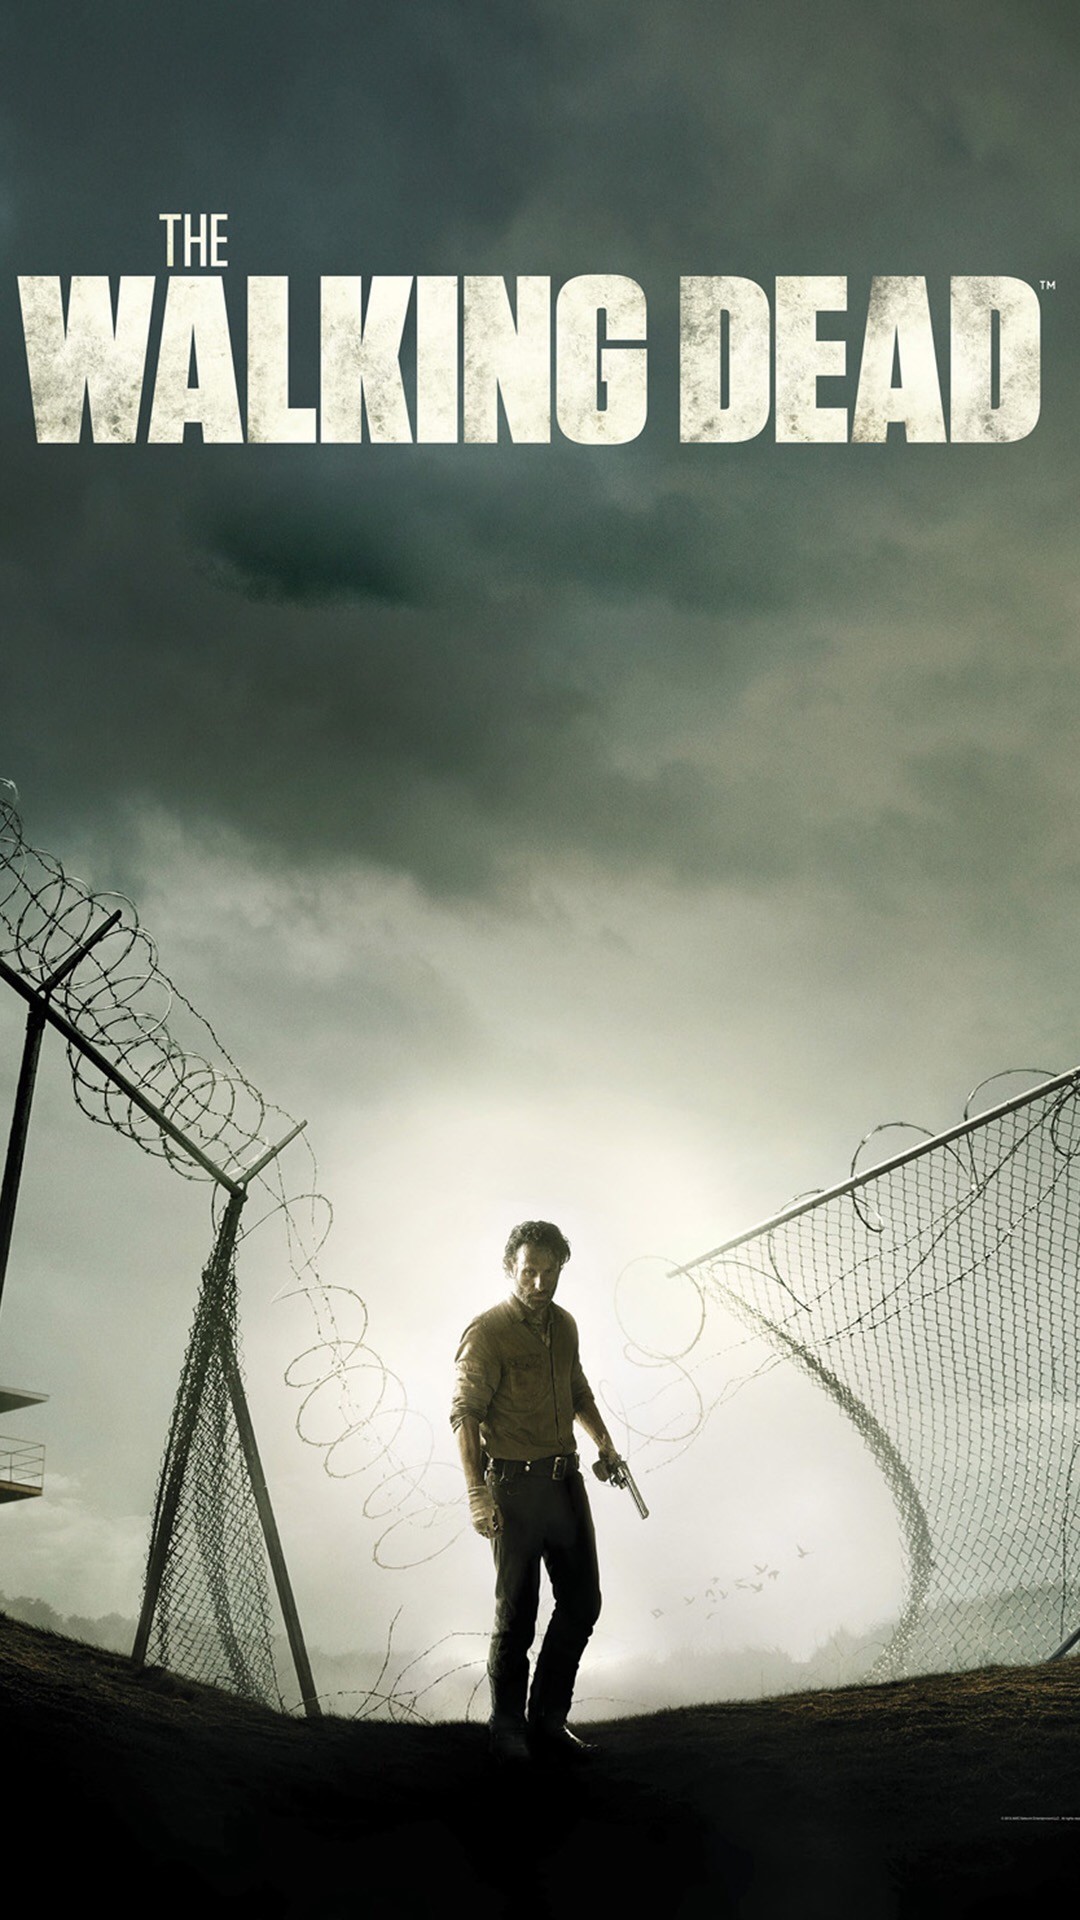 1080x1920 The Walking Dead iPhone wallpaper 5. Download: iPhone. The ...